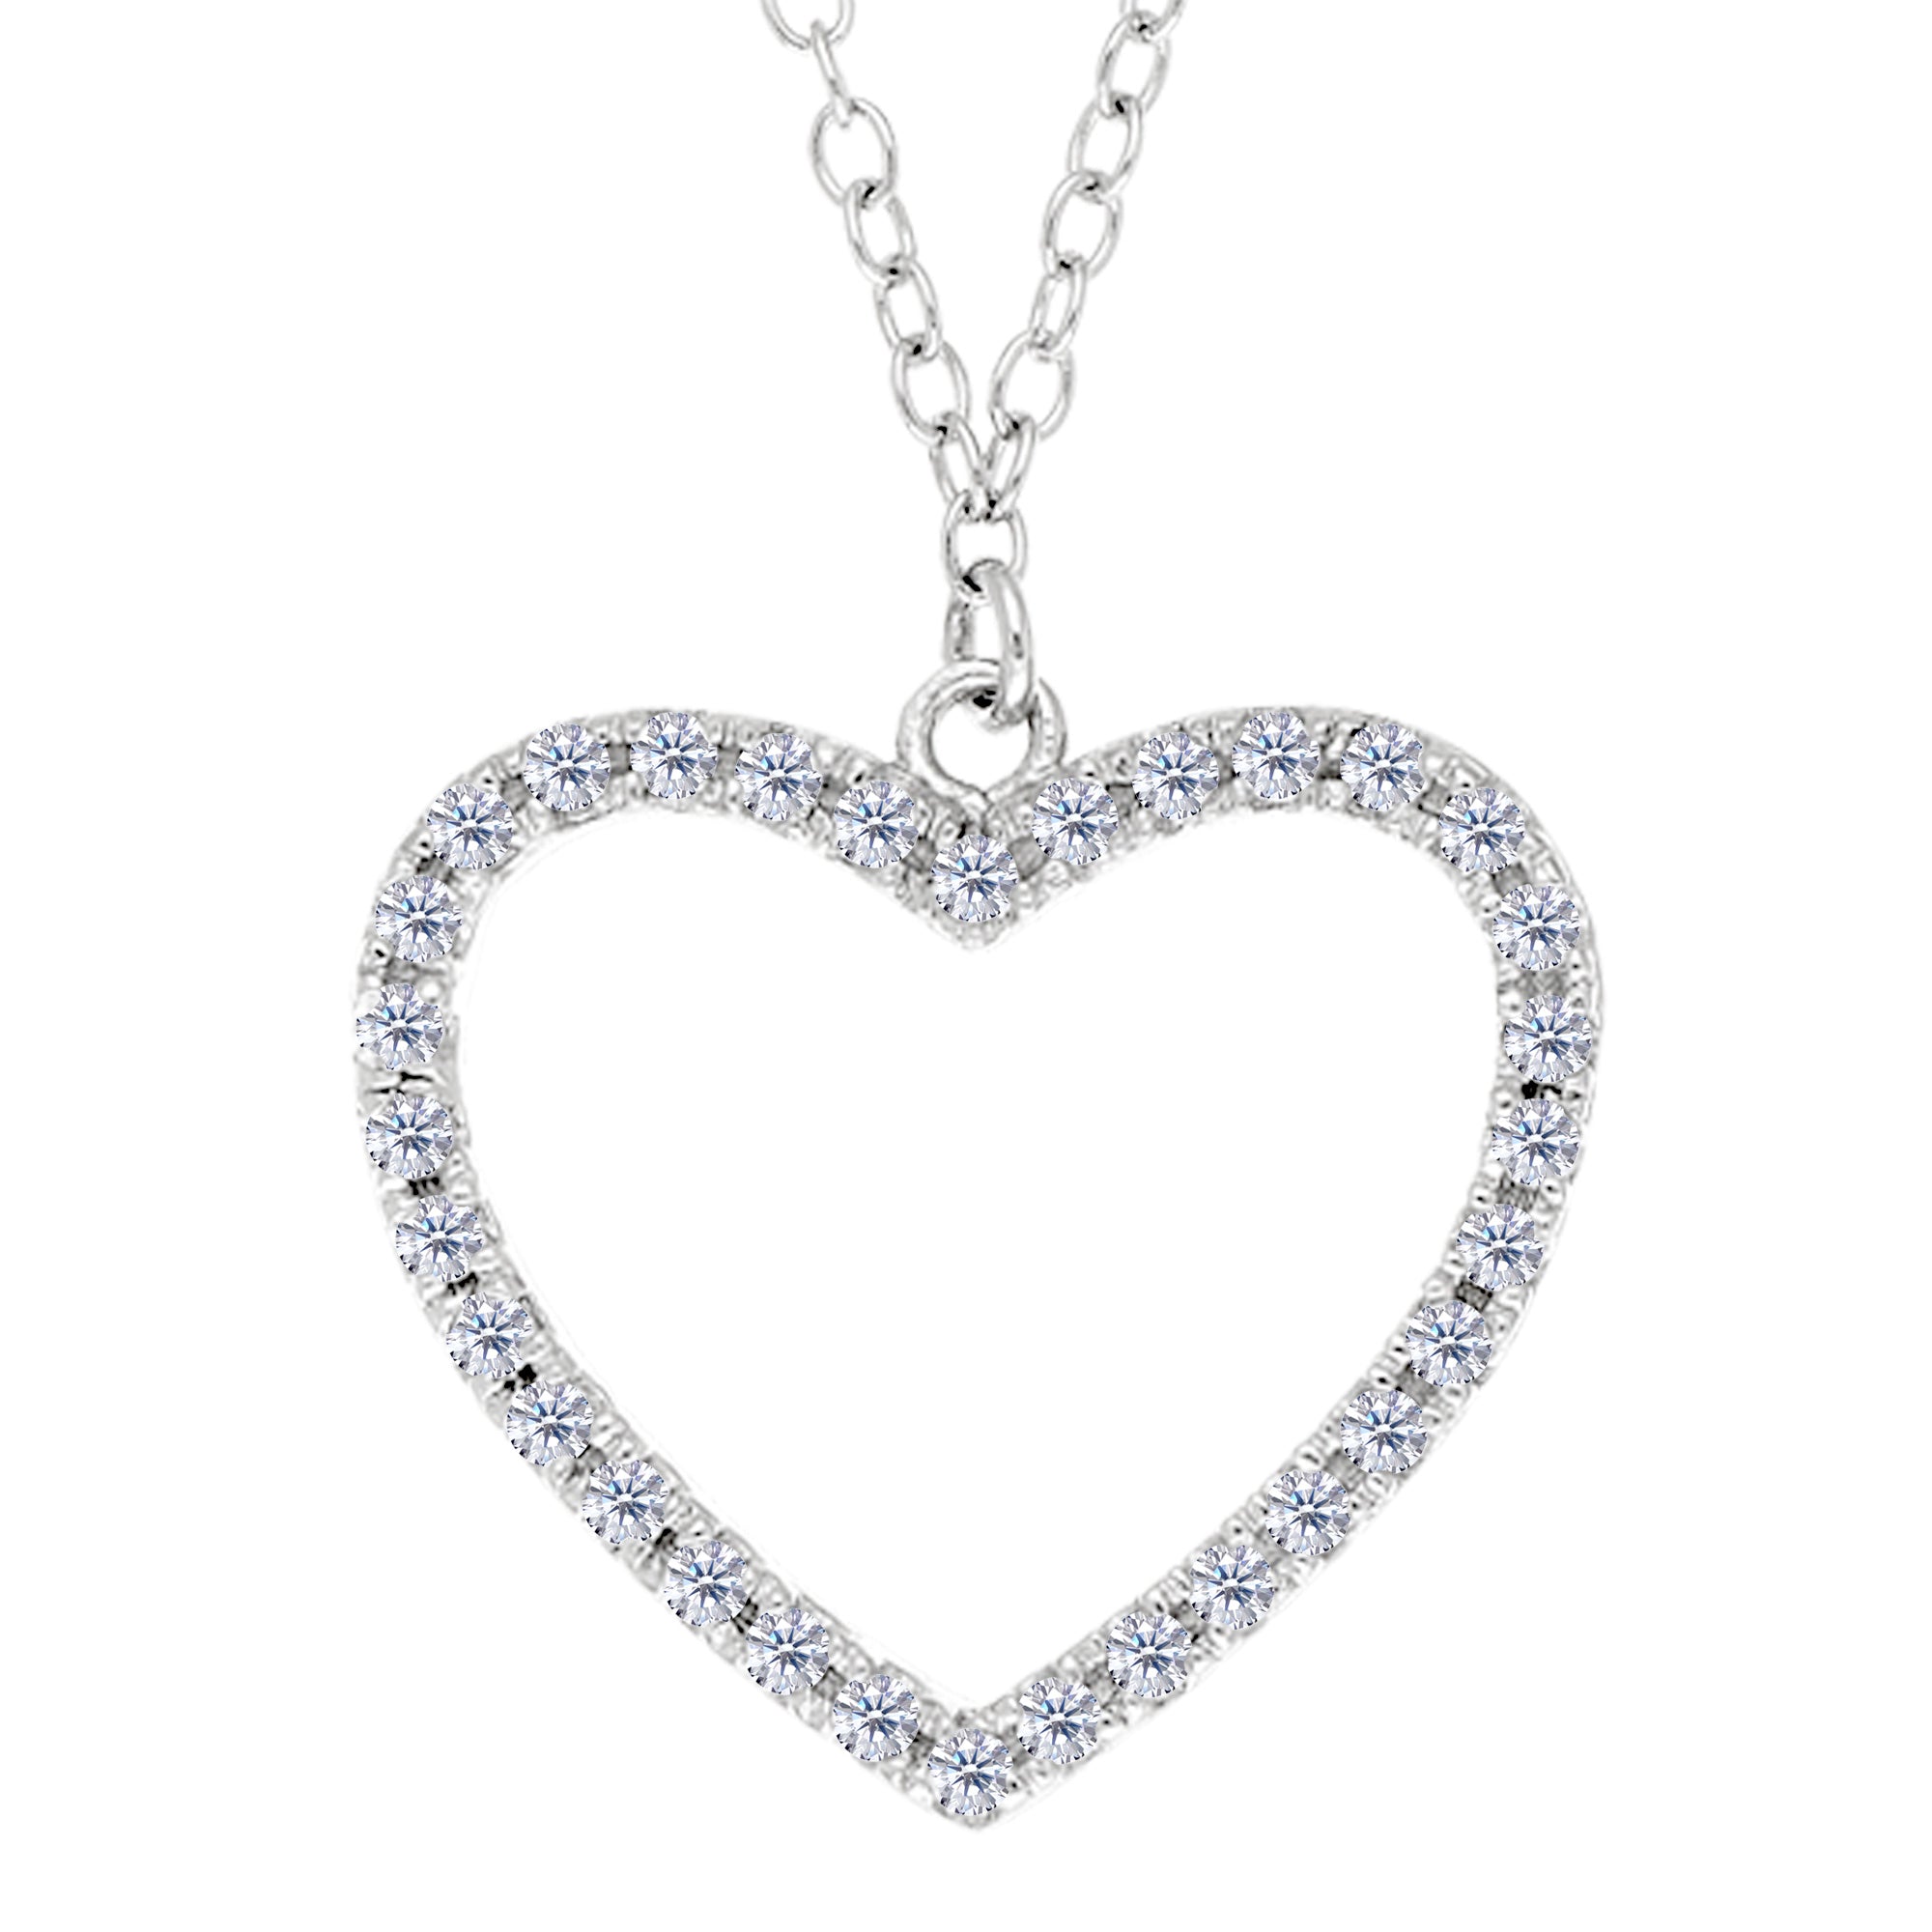 Heart And CZ Necklace In Sterling Silver, 18" fine designer jewelry for men and women